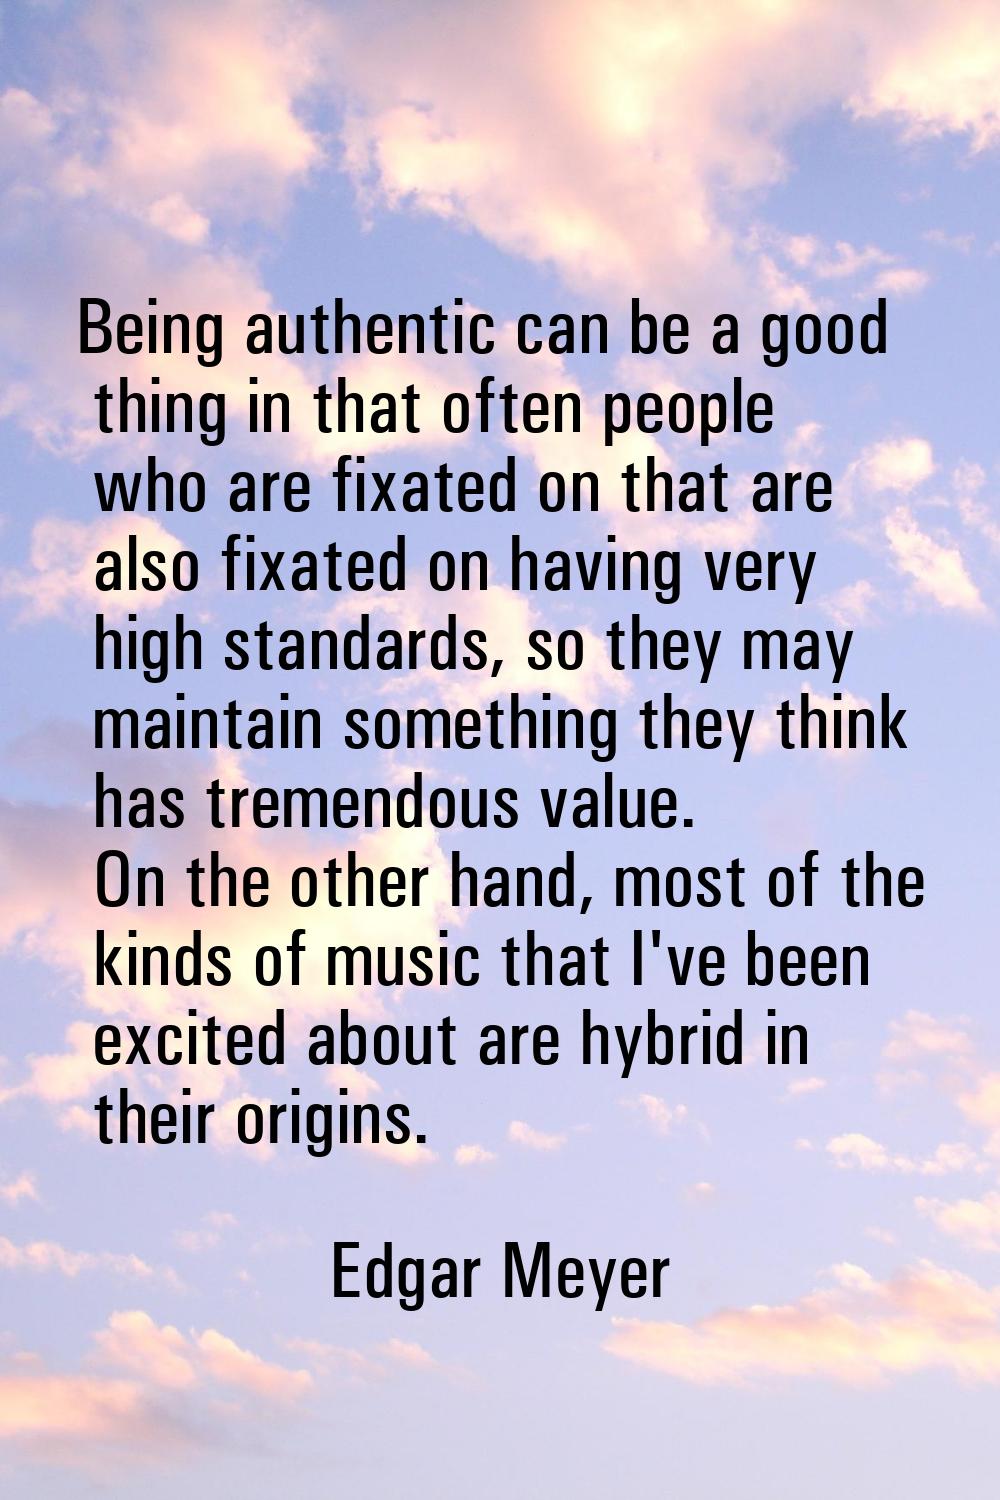 Being authentic can be a good thing in that often people who are fixated on that are also fixated o